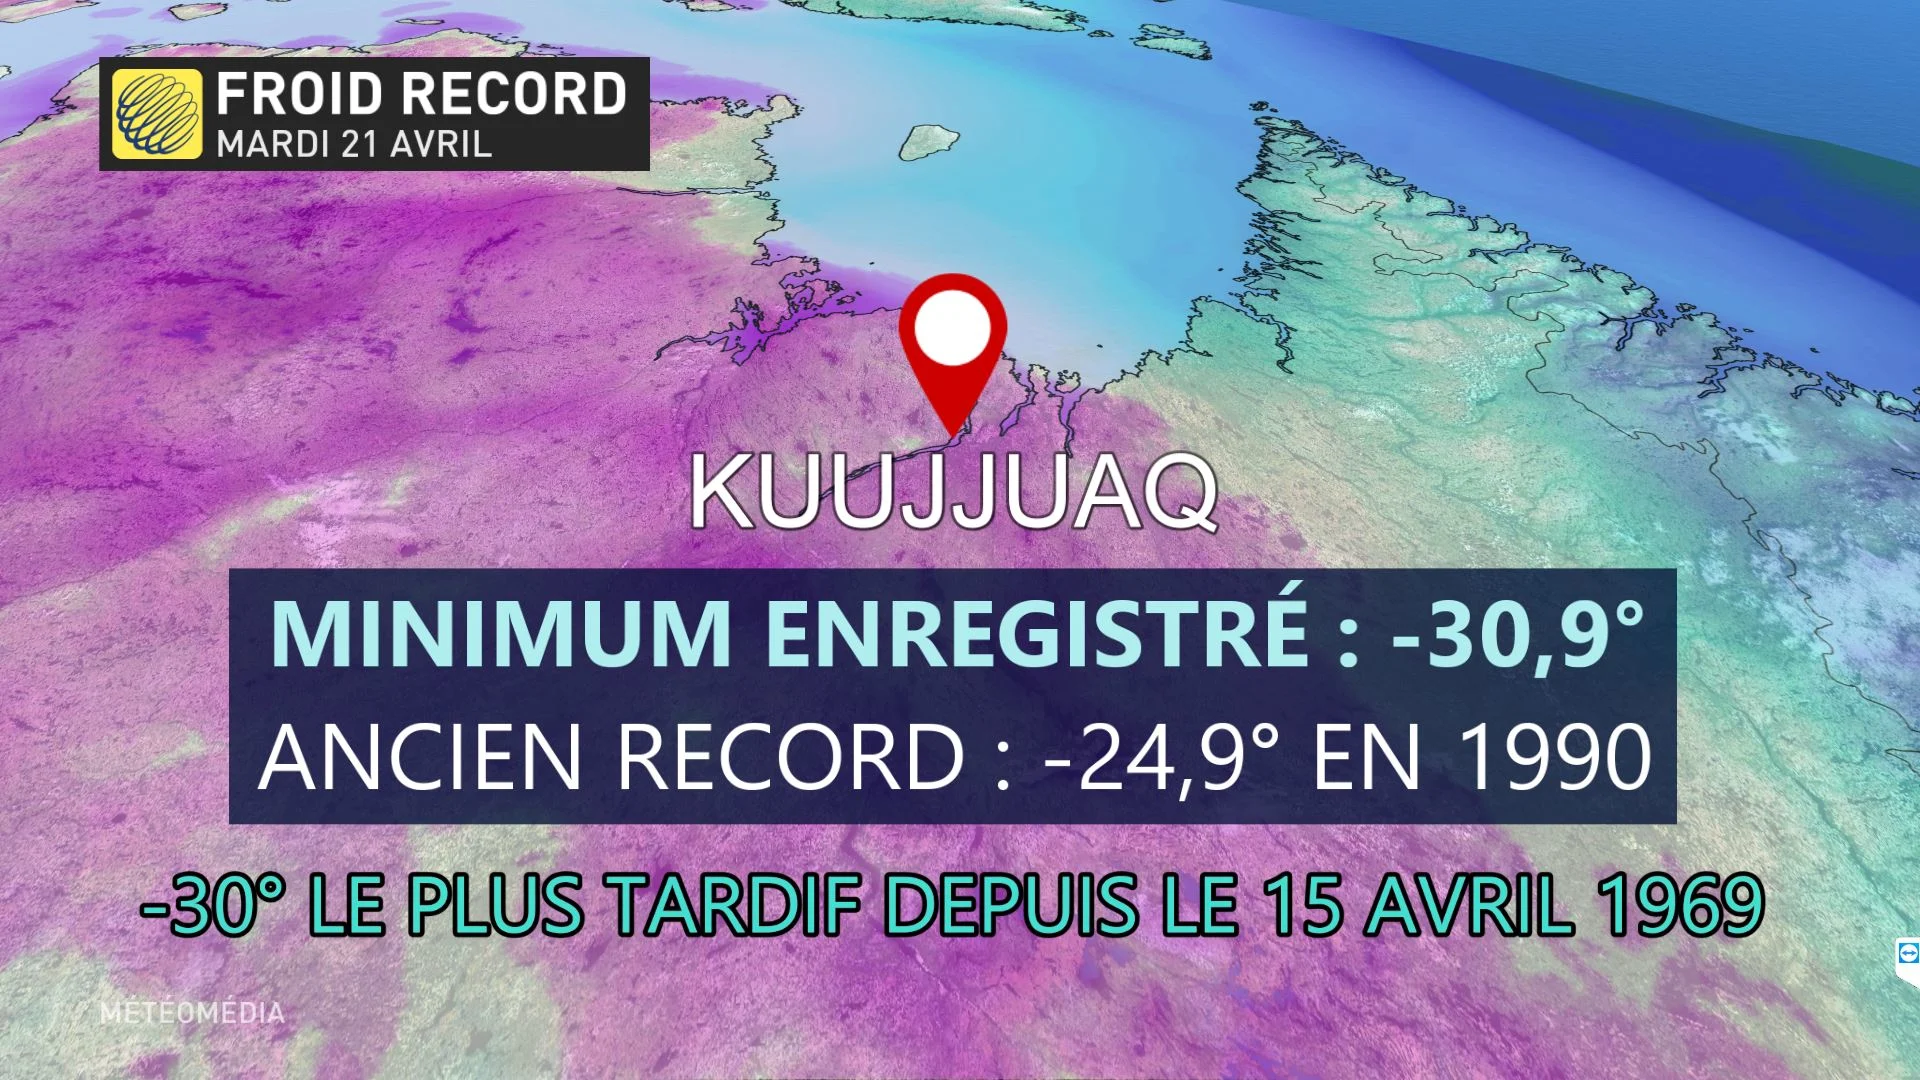 Records froid